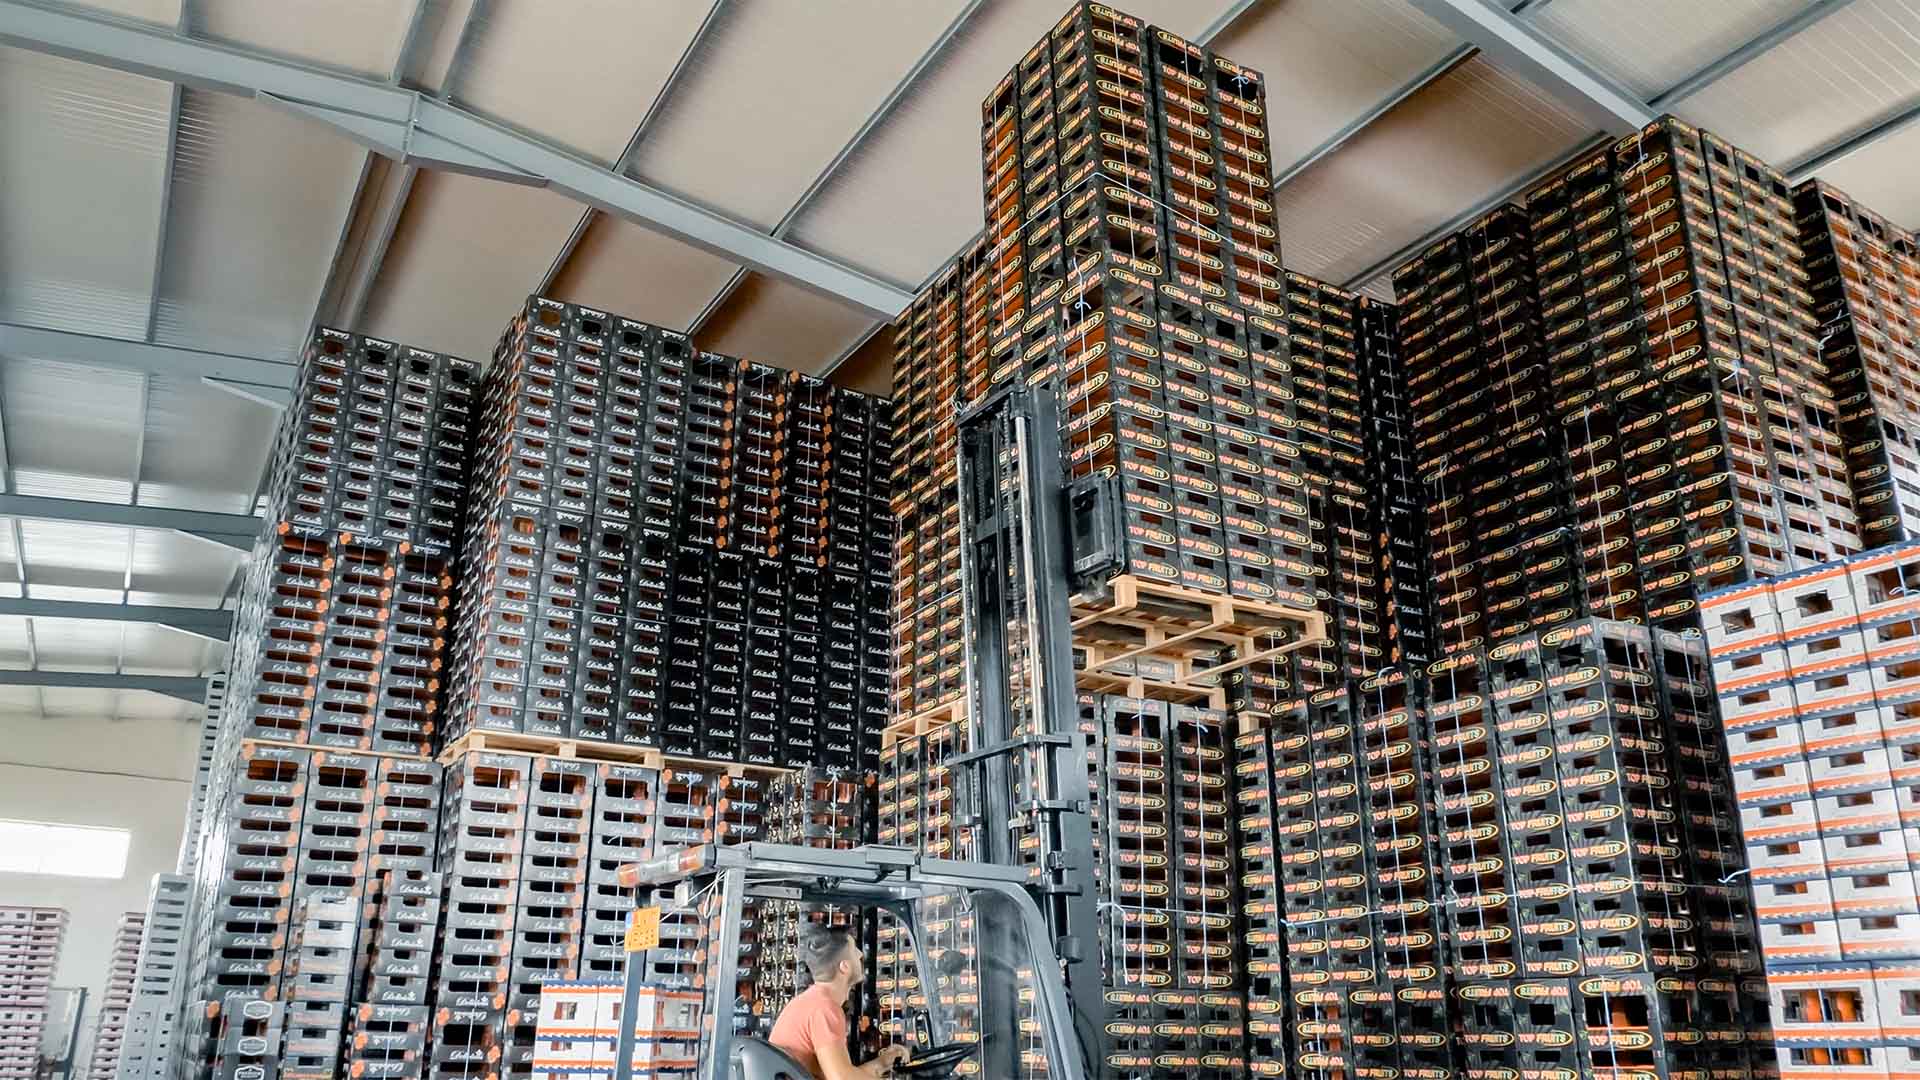 A forklift operator moving large pallets of packing materials stacking floor to ceiling in the corner of a warehouse